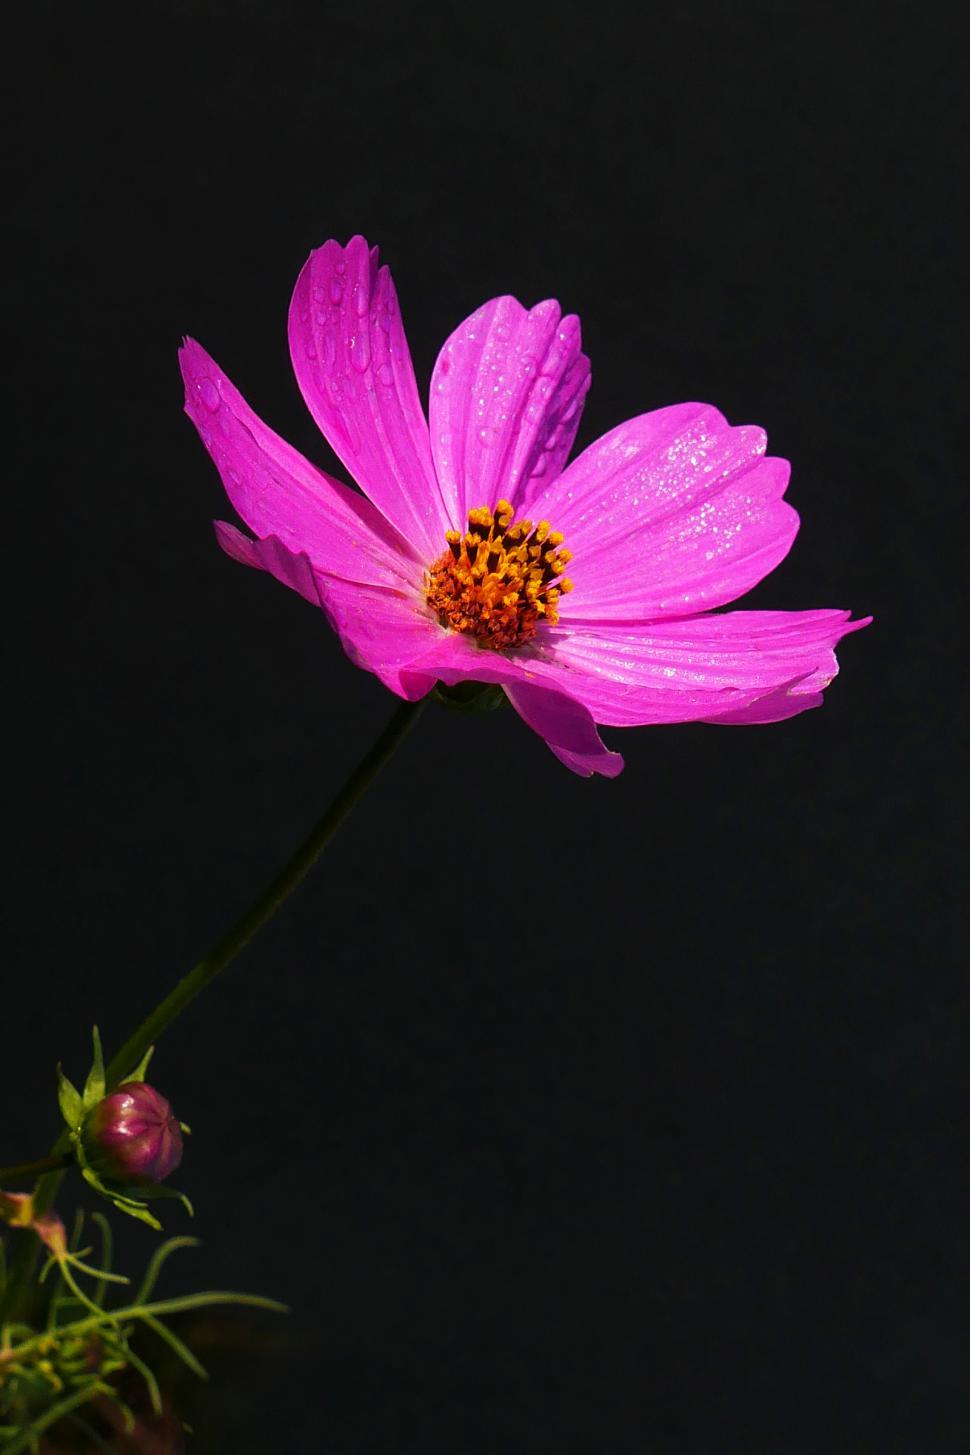 Free of Cosmos Flower on Dark Background. Download Free Image and Free Illustrations